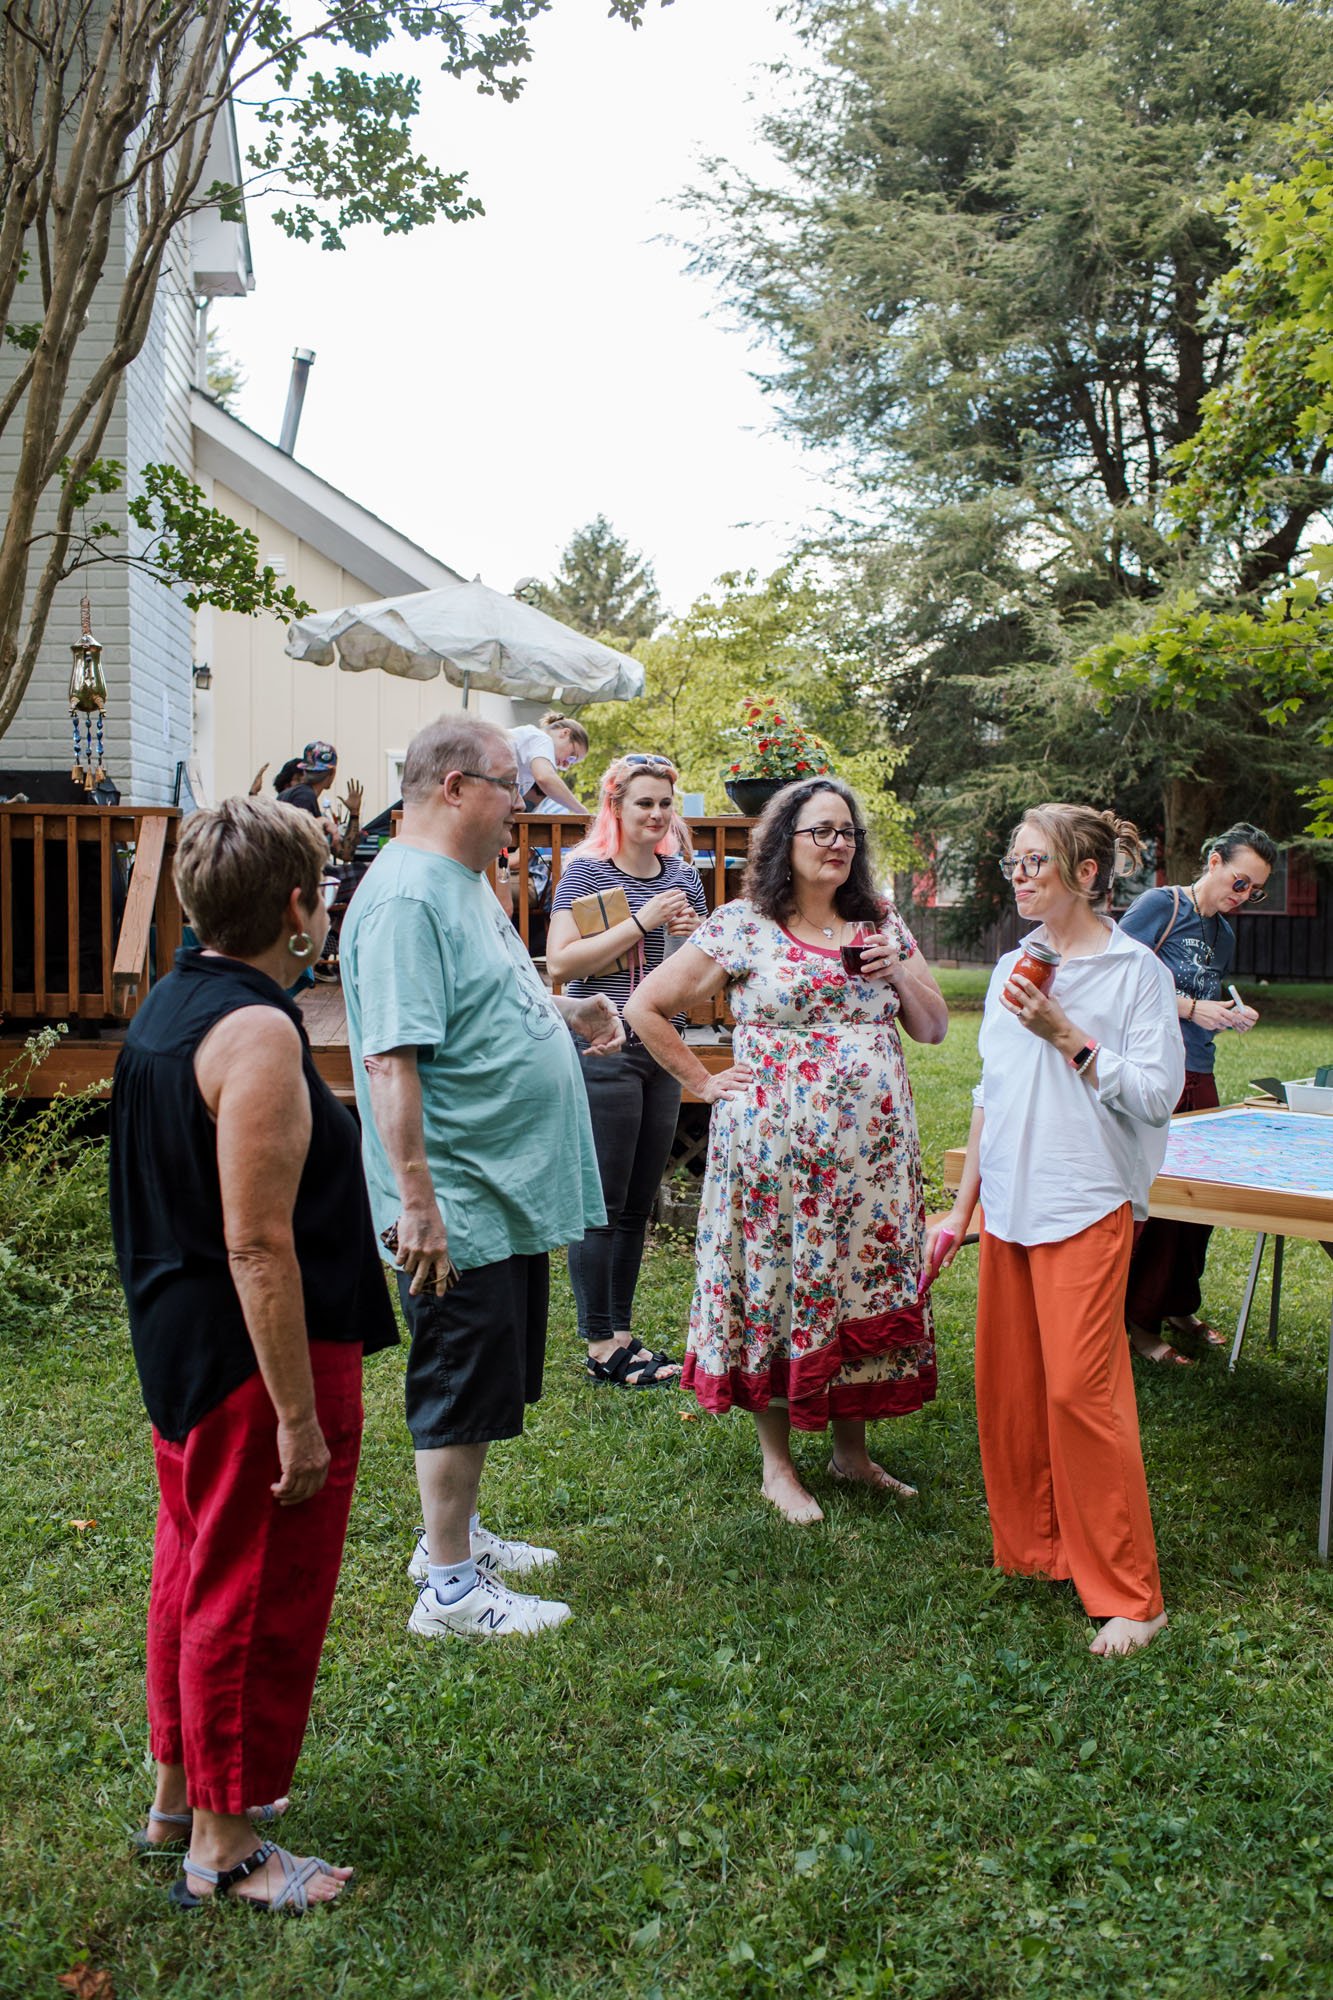 Guests speak with EAT/ART curator Jocelyn Mathewes on the lawn.